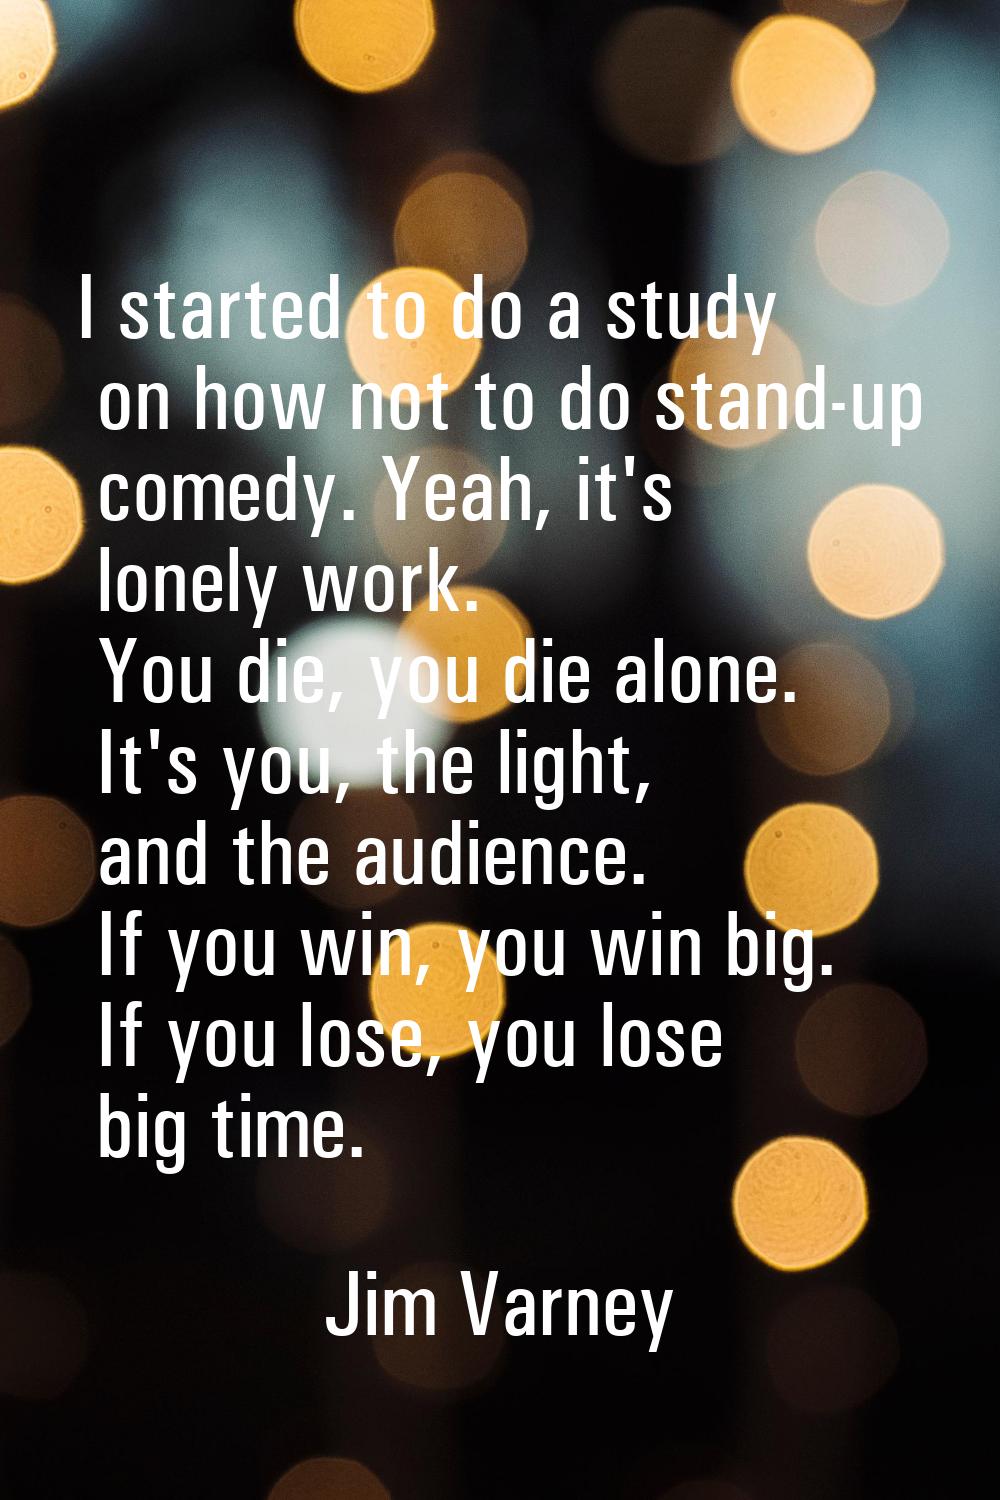 I started to do a study on how not to do stand-up comedy. Yeah, it's lonely work. You die, you die 